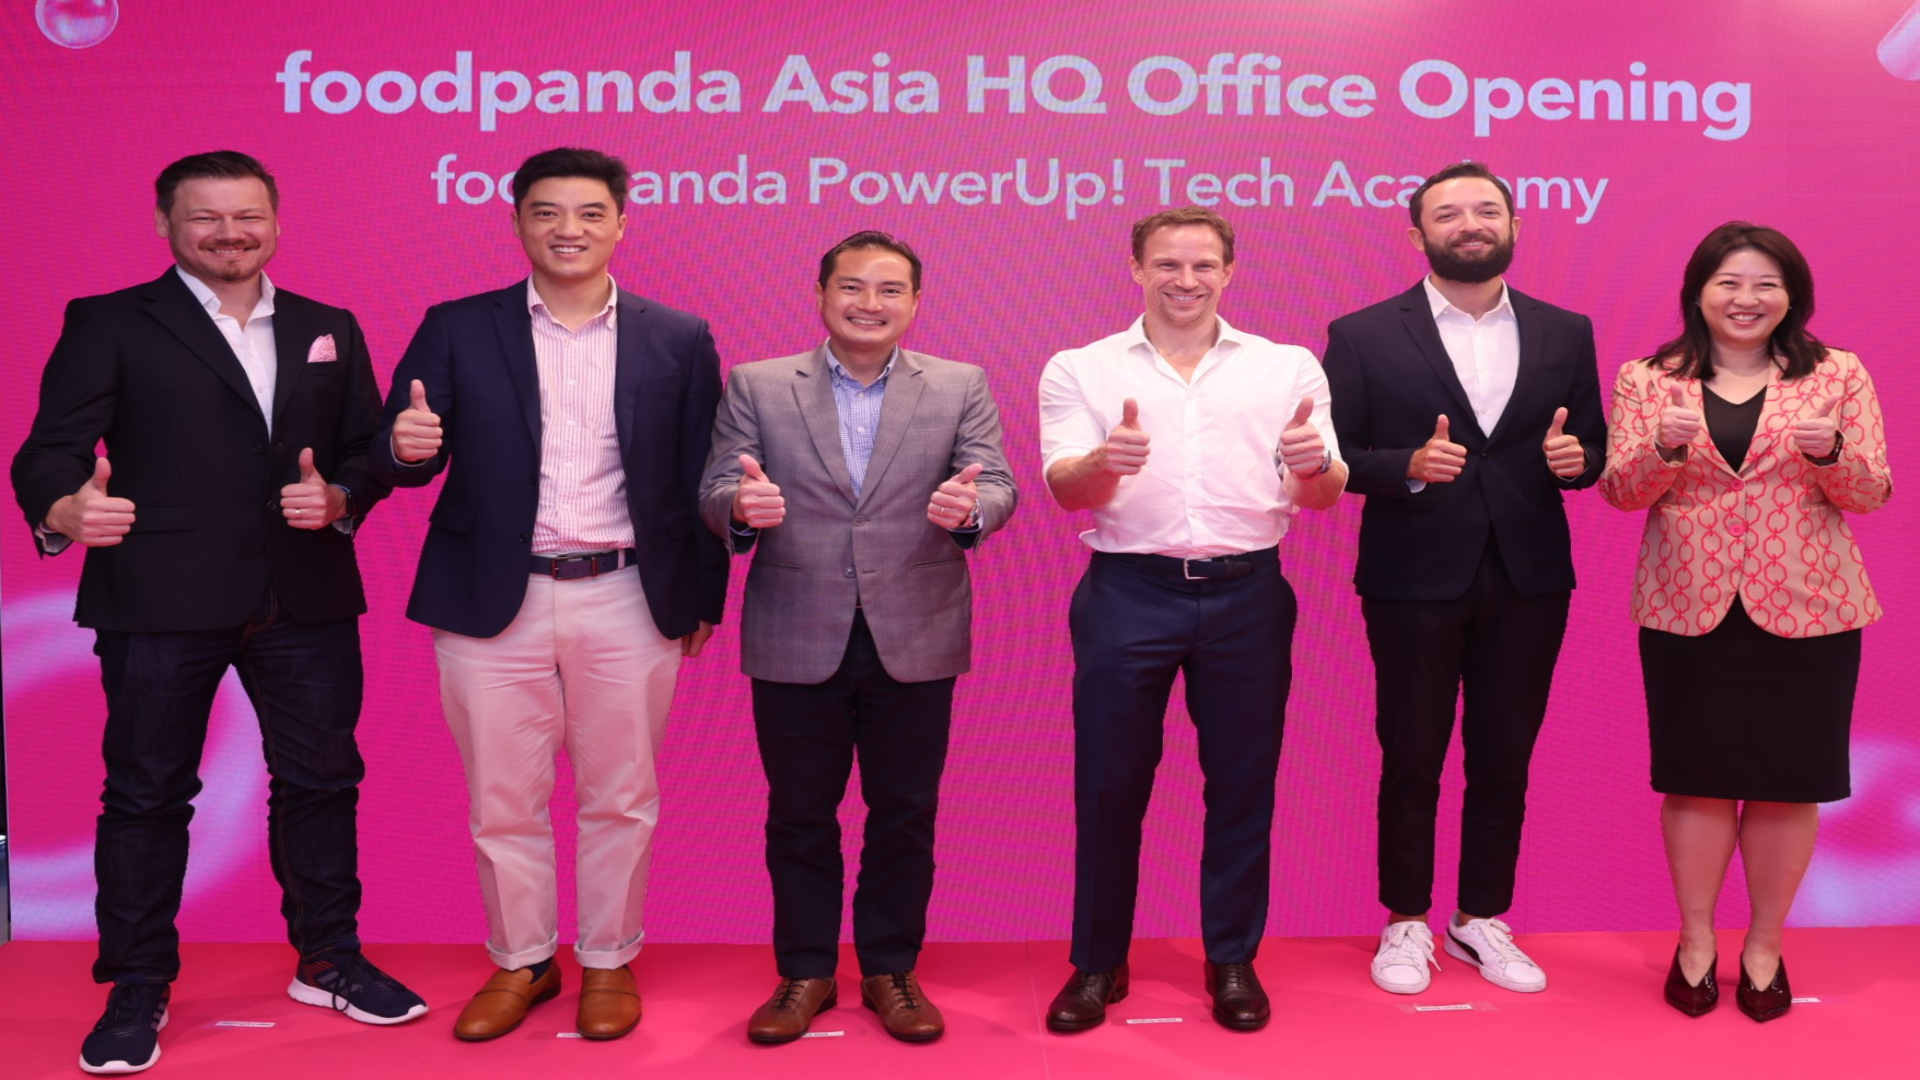 Image - foodpanda marks 10th anniversary with new regional HQ in Singapore; launches foodpanda PowerUp! Tech Academy